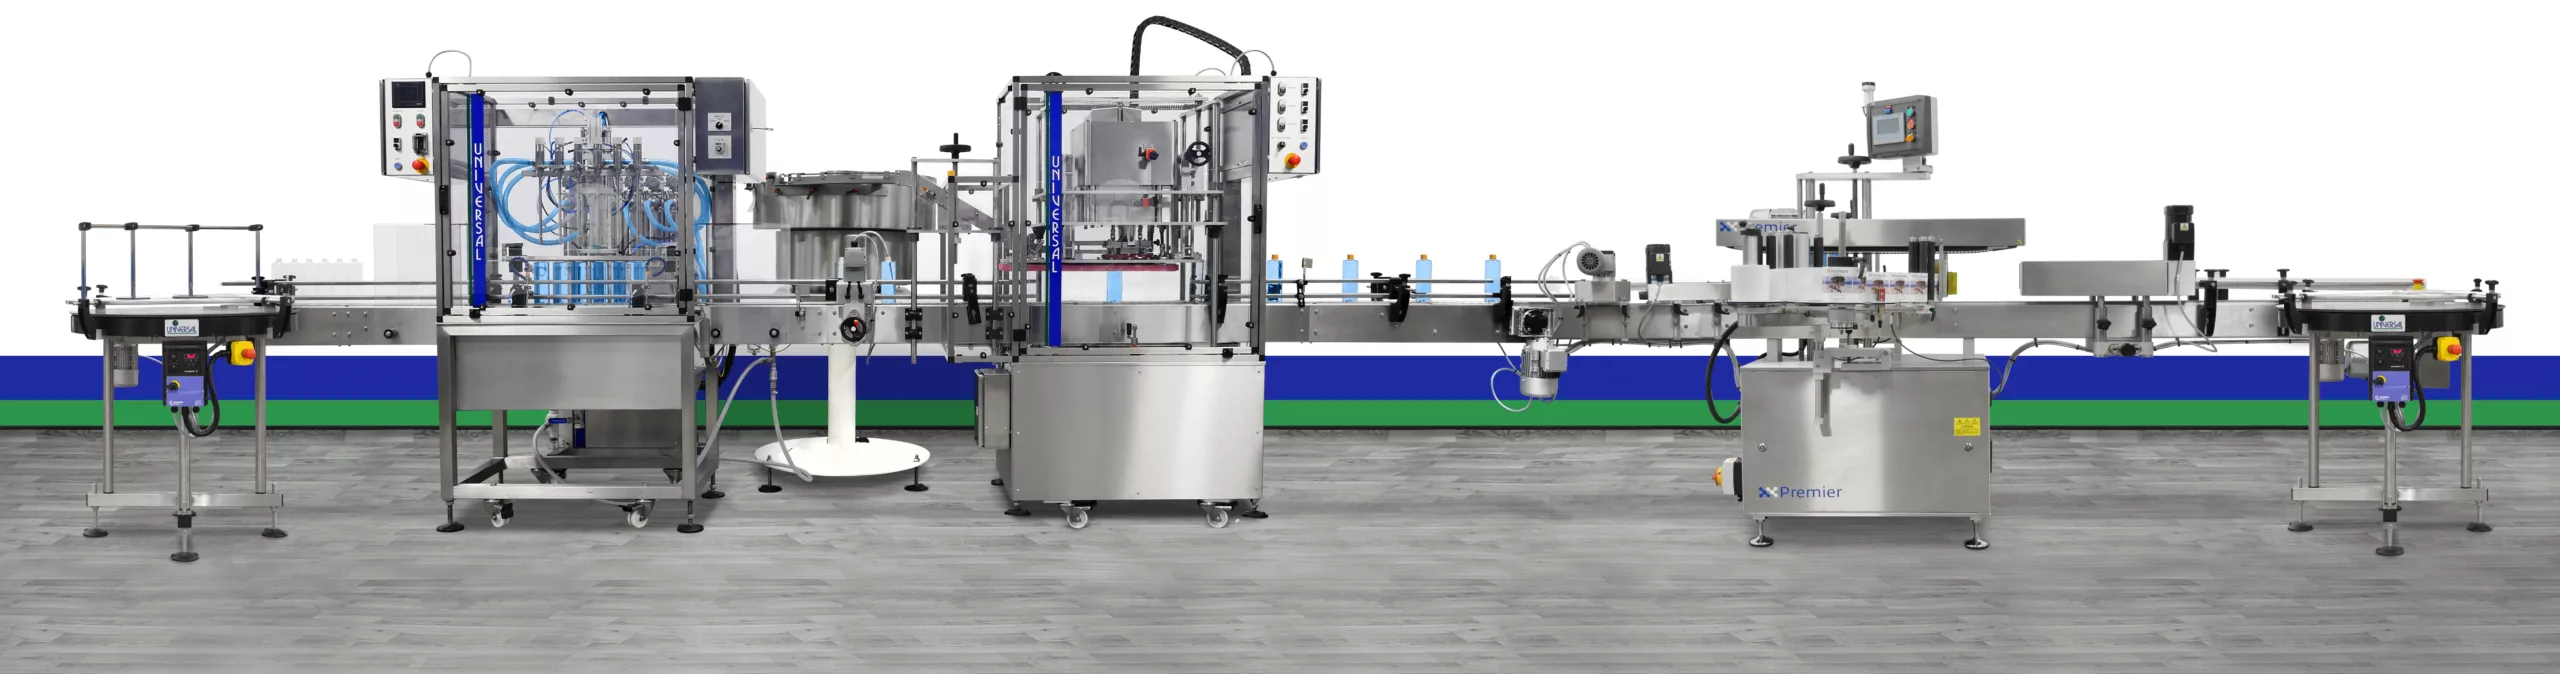 Complete liquid filling, capping and labelling production line with rotary infeed and outfeed tables